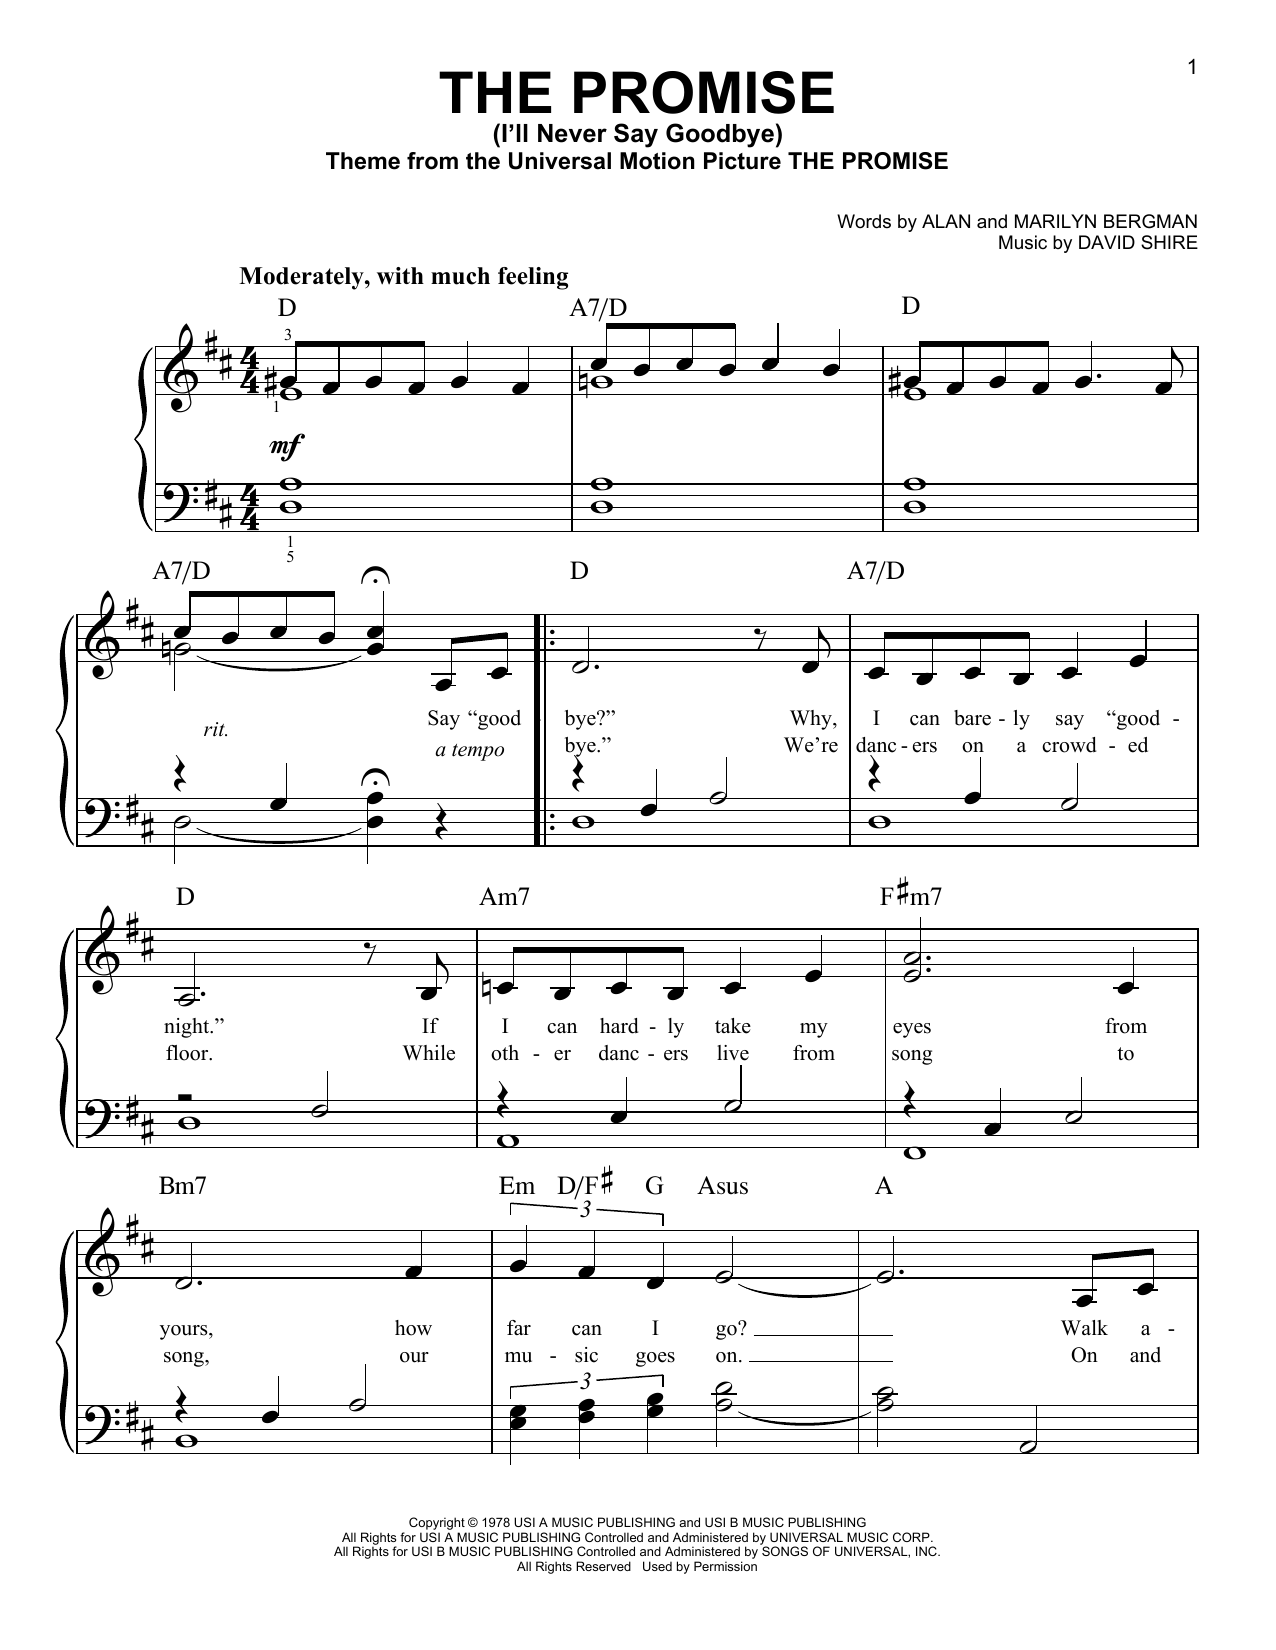 Download David Shire The Promise (I'll Never Say Goodbye) Sheet Music